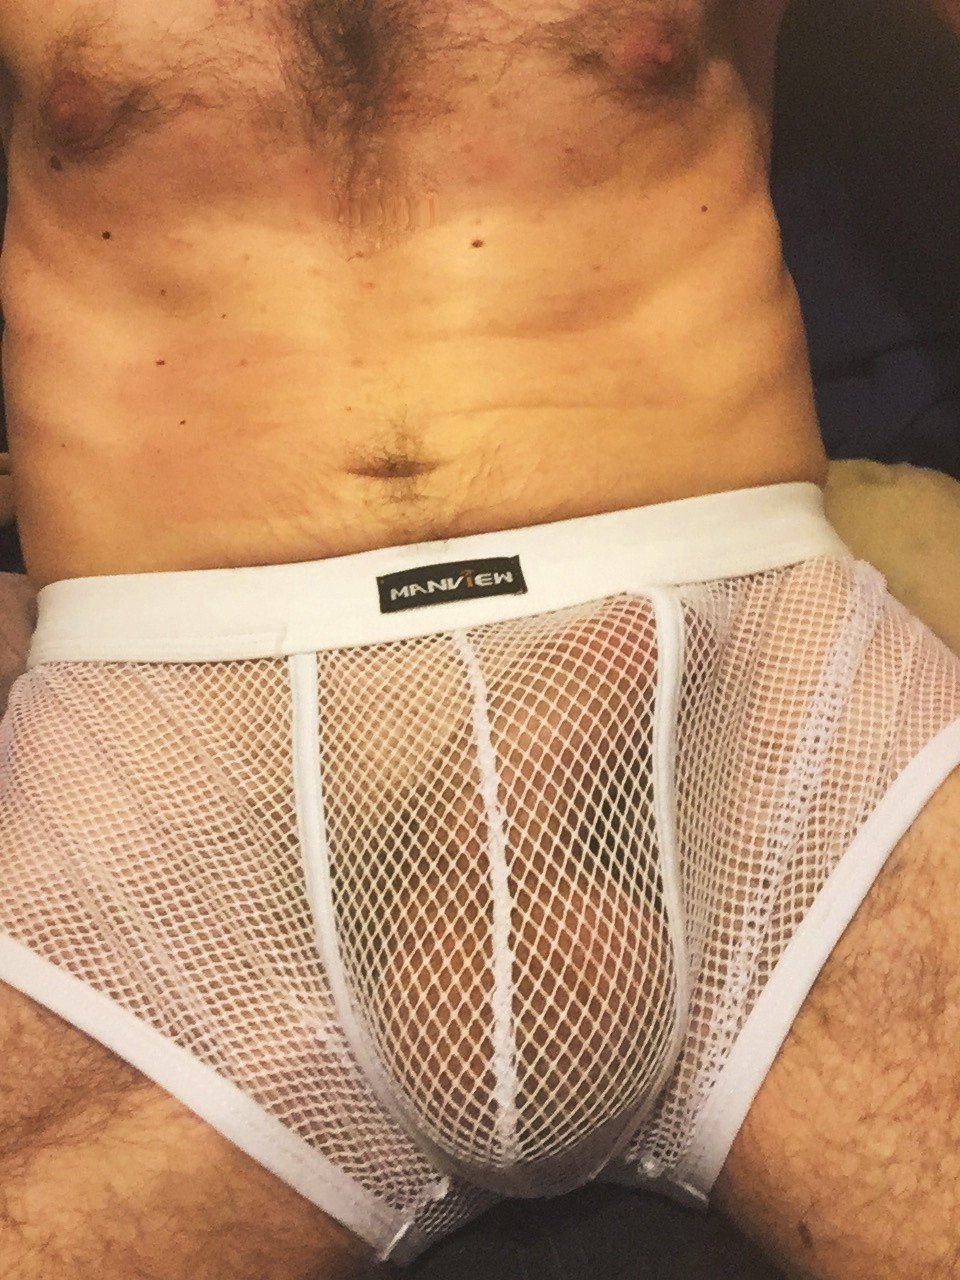 Photo by bigdickrichiee with the username @bigdickrichiee,  August 7, 2019 at 9:01 PM. The post is about the topic Gay and the text says 'My website is down, so I am here to post some of my hottest pics!   Let me know if you guys want more :)   I'm always ready to have a good time....8 inches strong!'